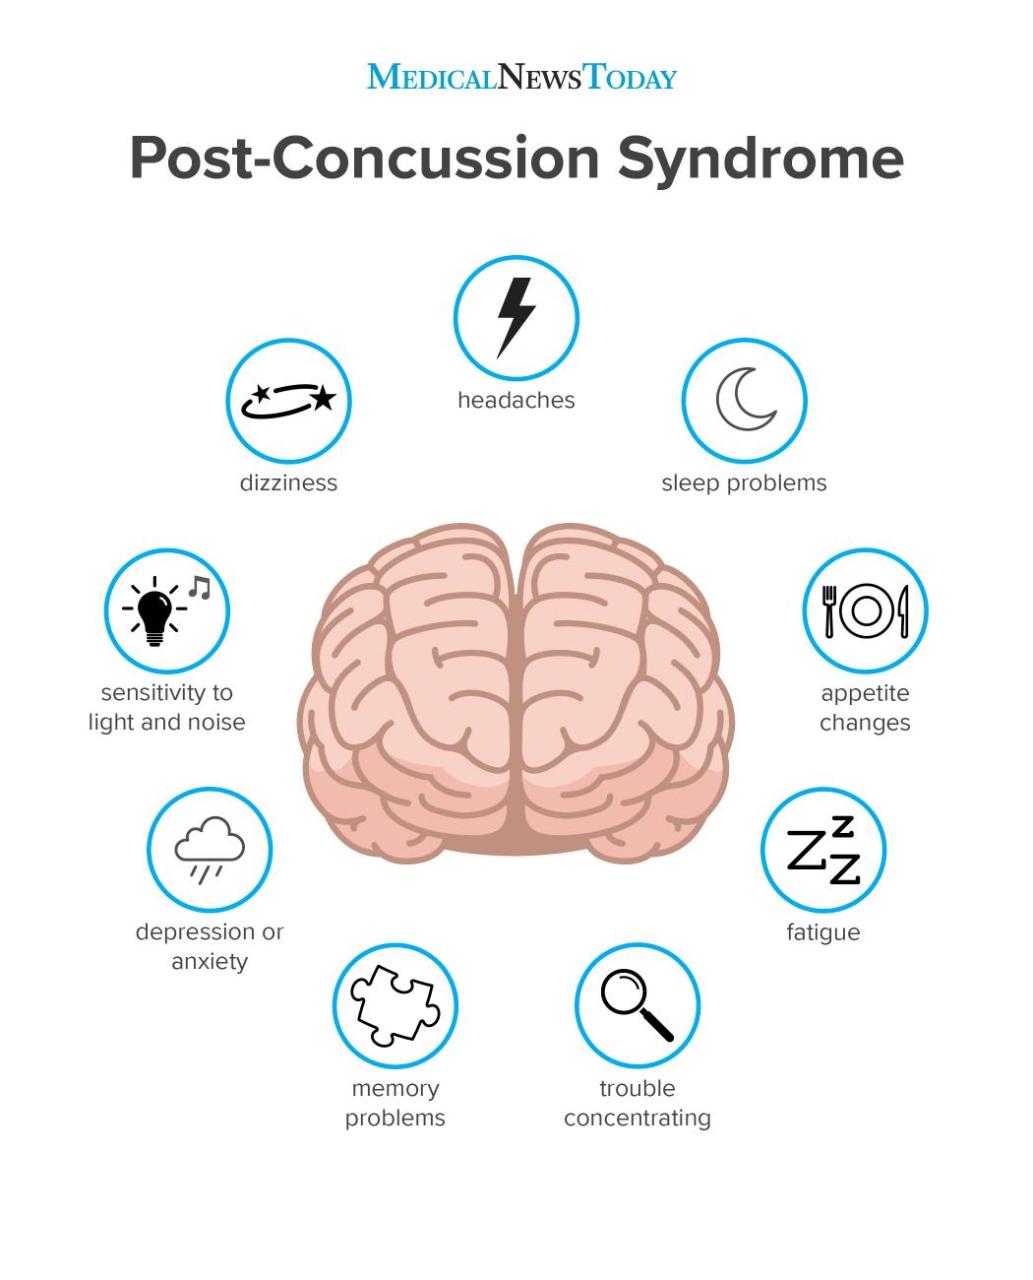 Post-Concussion Syndrome: Symptoms, Treatment, And Outlook